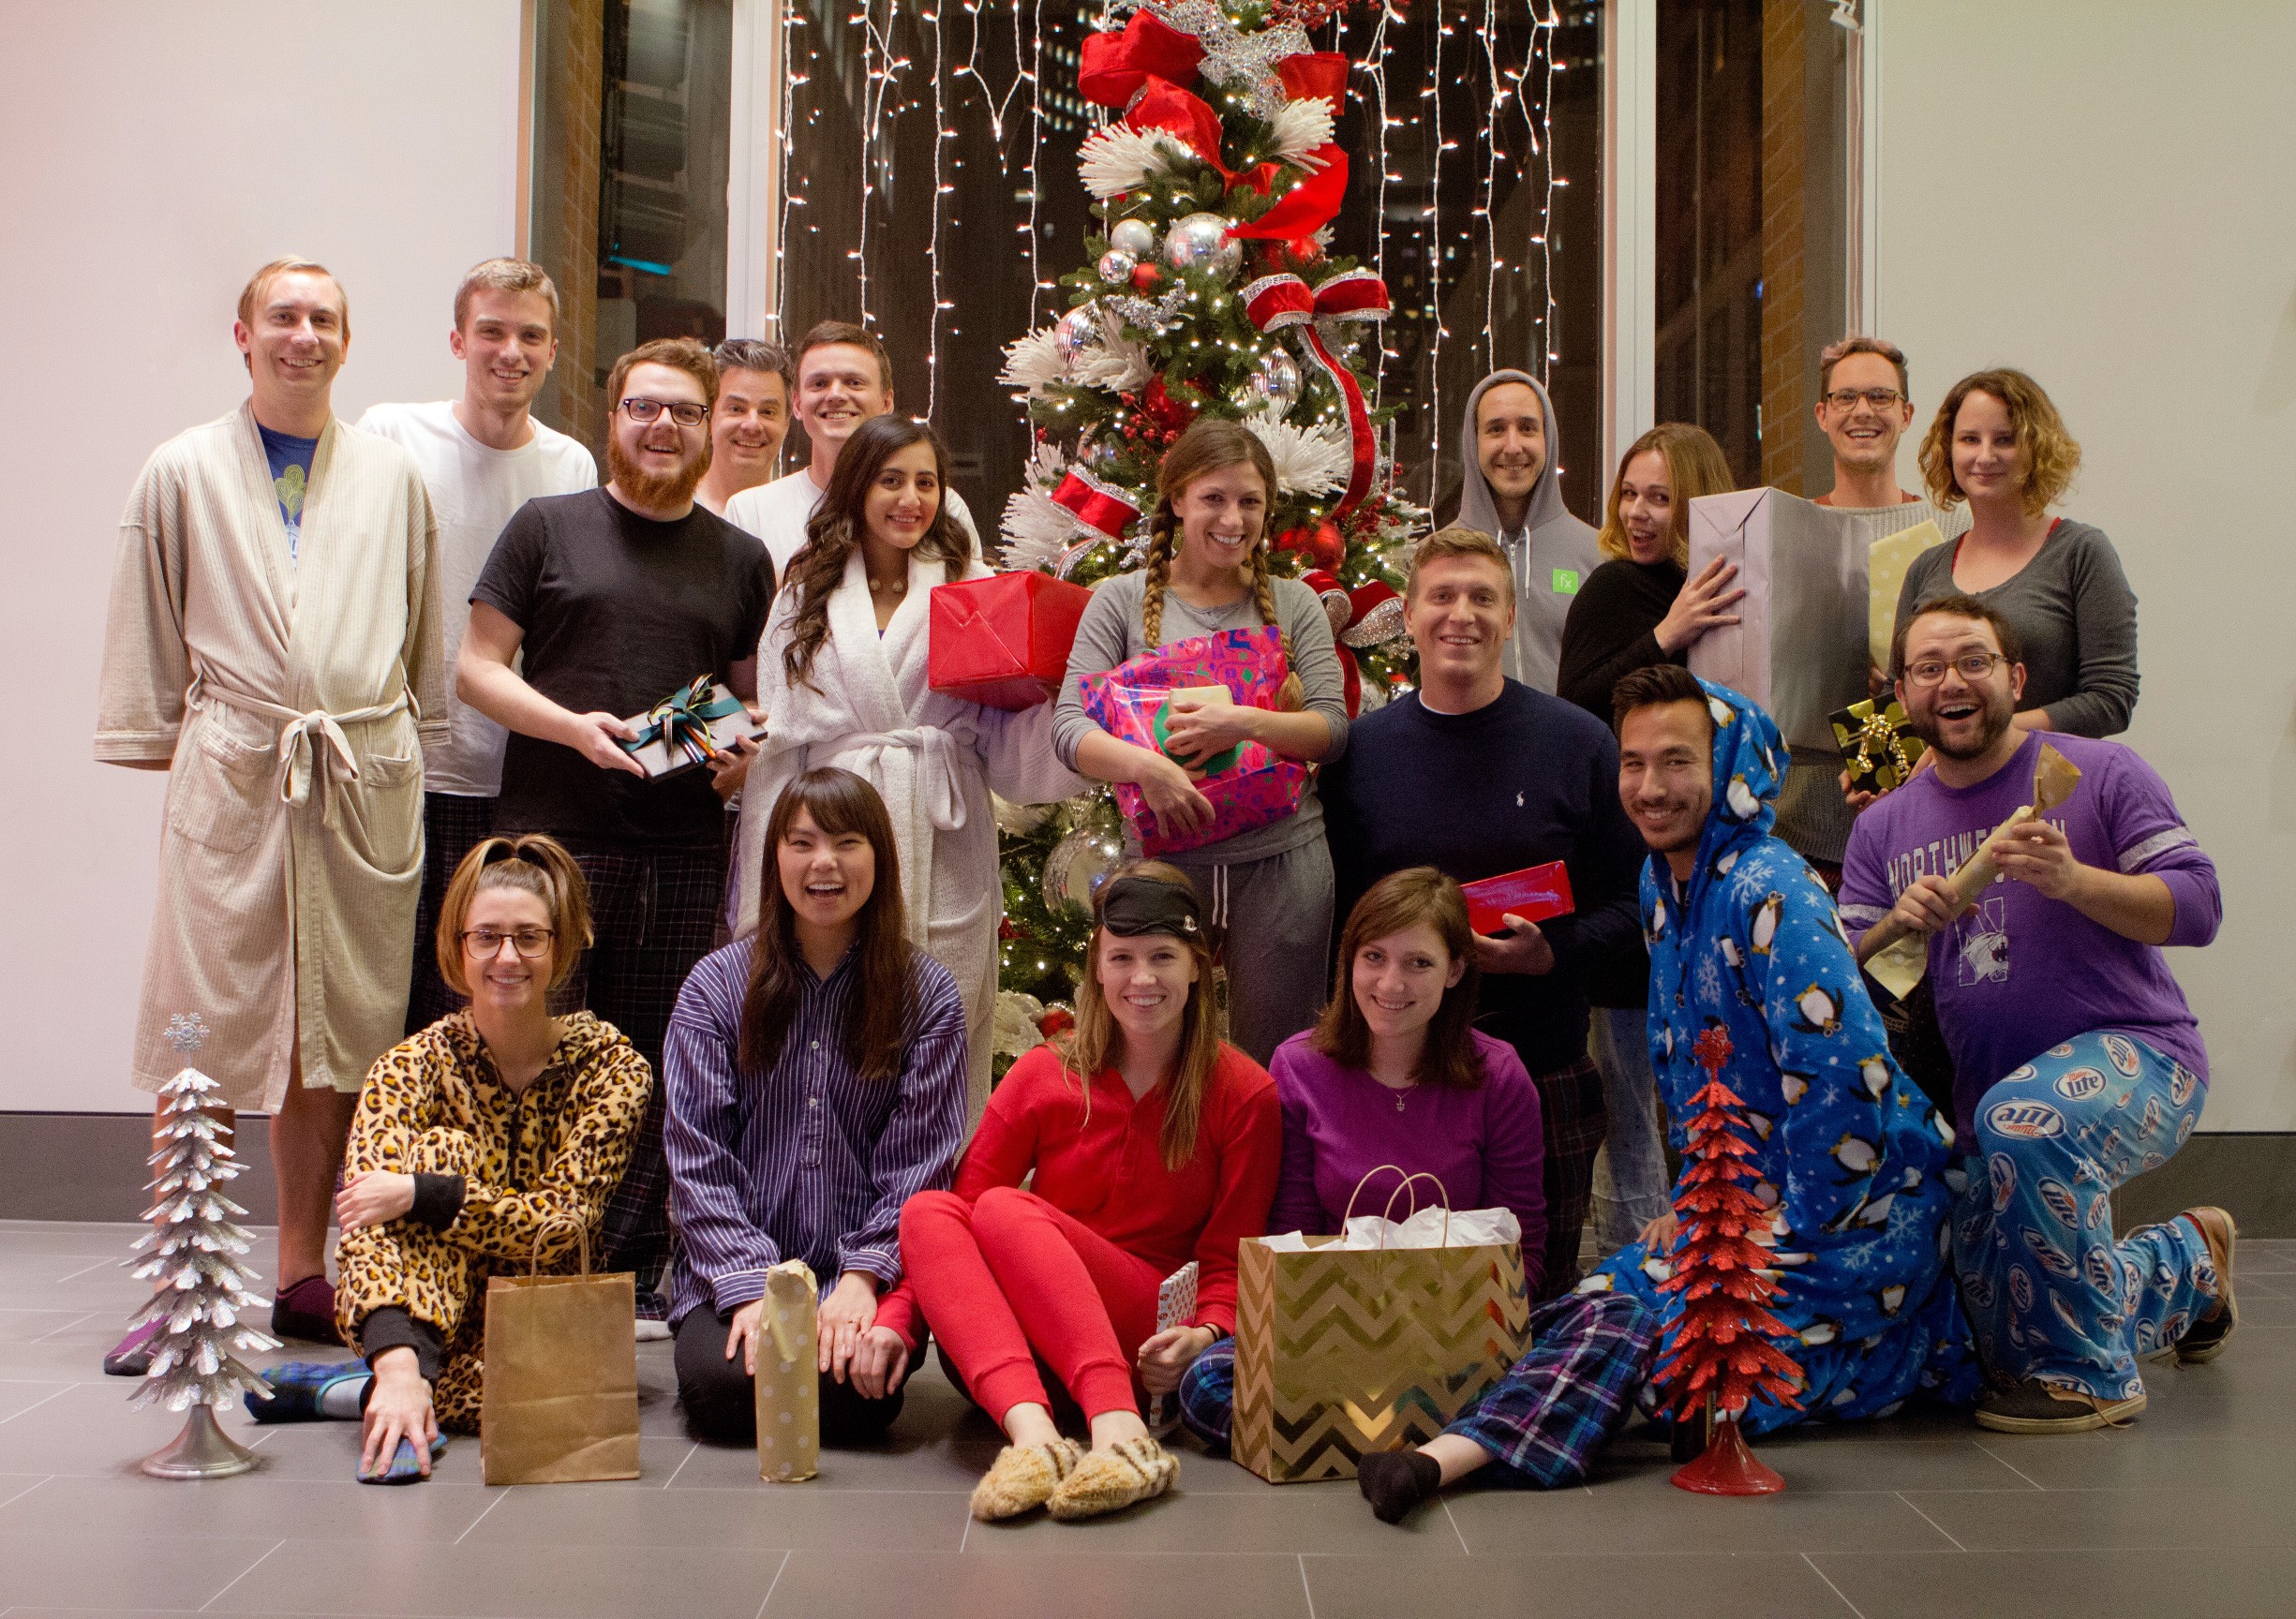 Our team's holiday photo, right after the PJ gift exchange